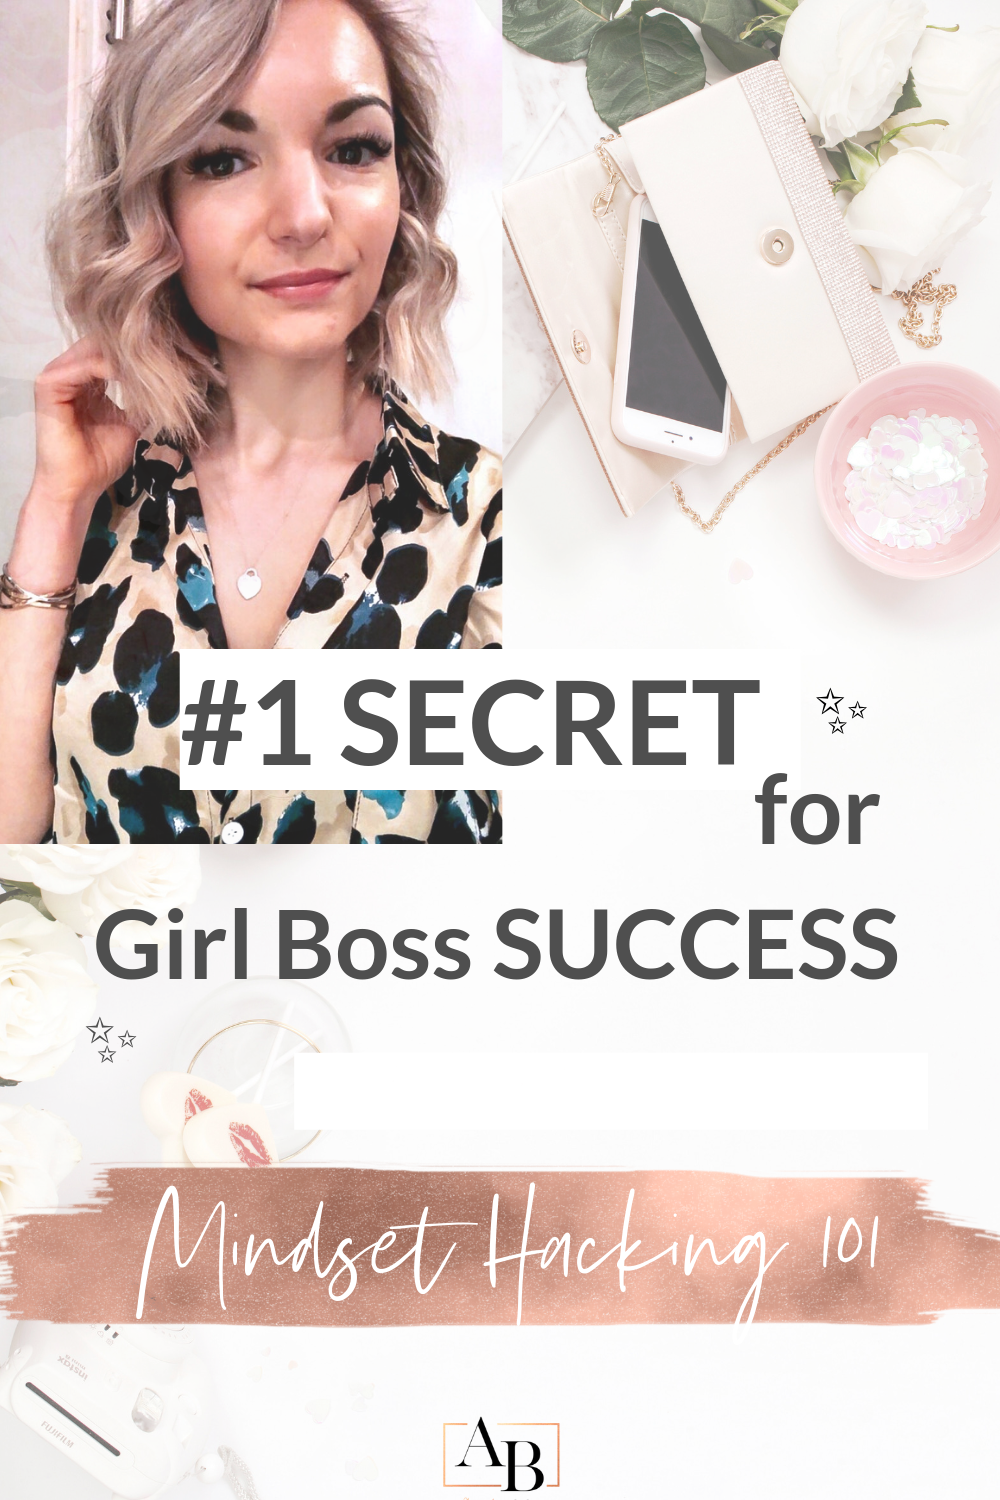 Curious how Girl Boss ladies get their mindset in the right place? Well, here is how! The best kept secret for success seams simpel, but its extremely effective! Let the magic happen!